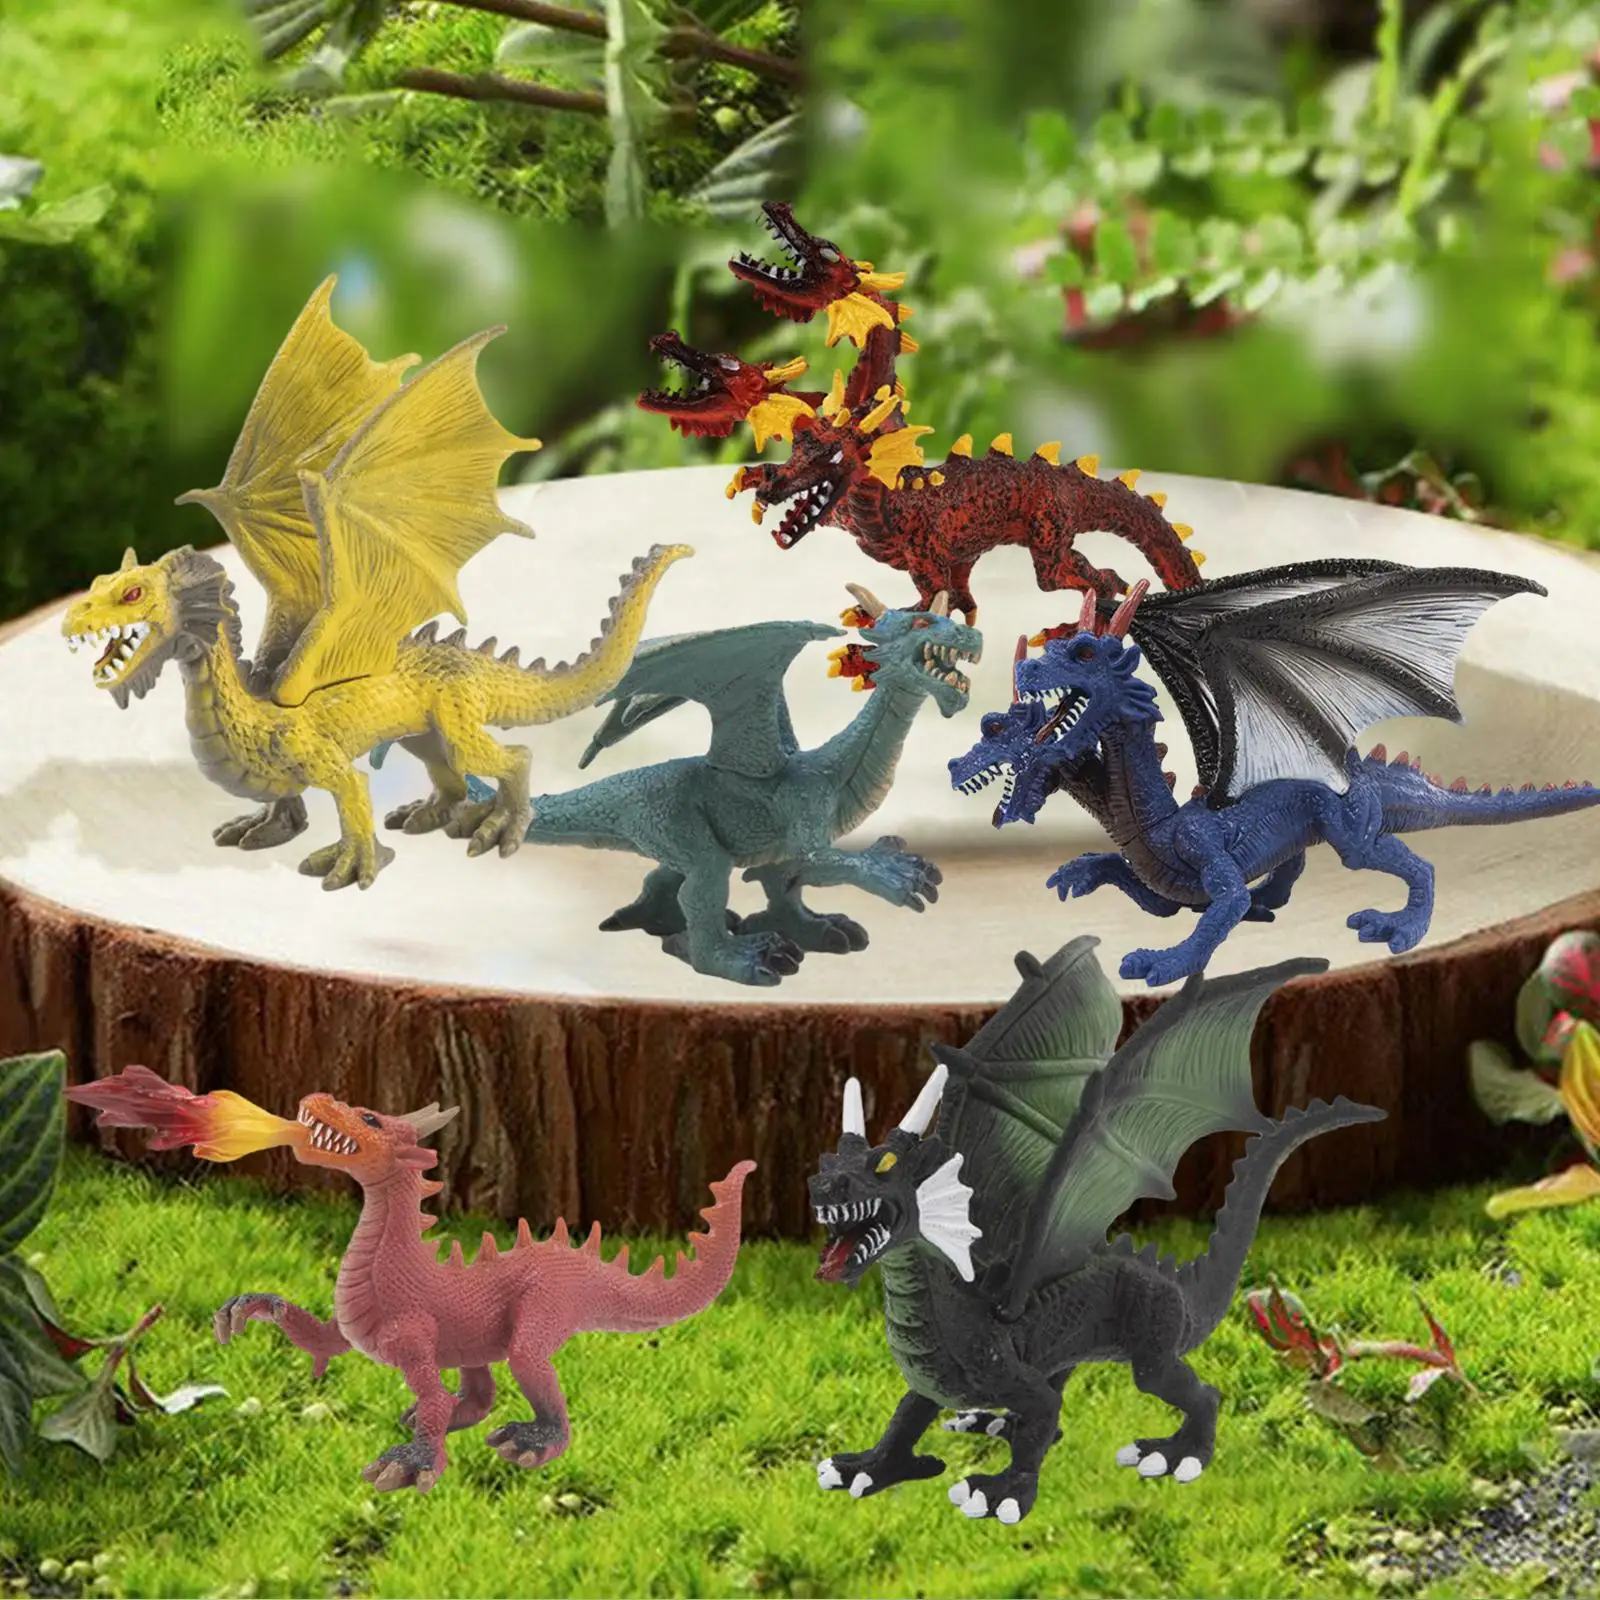 6 Pieces Dragon Figurines Colorful Educational Toy Doll Dragon Figures Kids Toy Action Figurine for Party Prop Collection